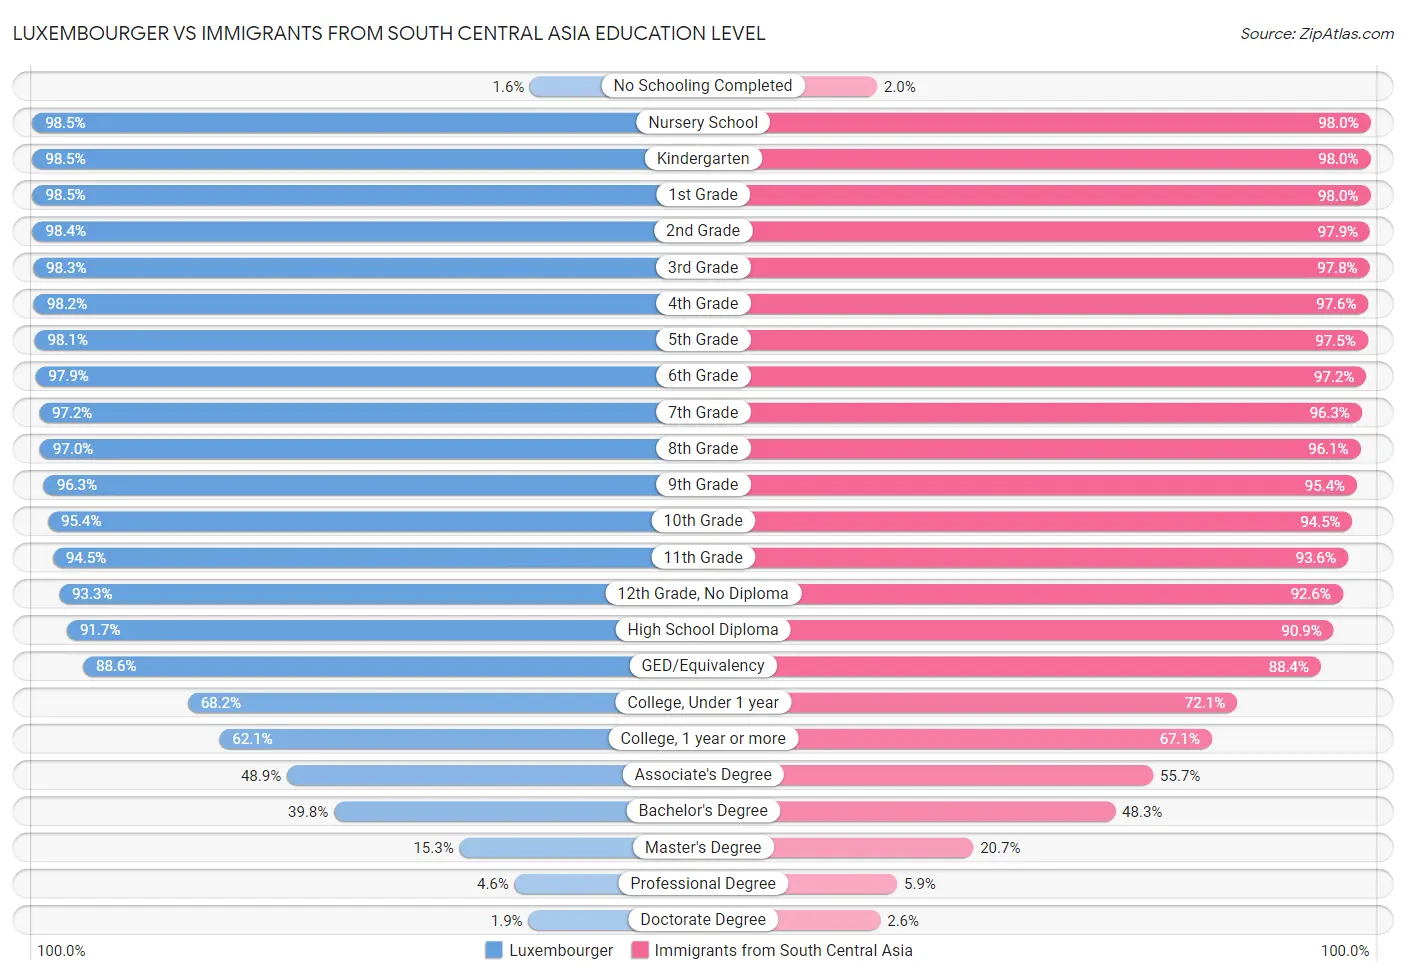 Luxembourger vs Immigrants from South Central Asia Education Level